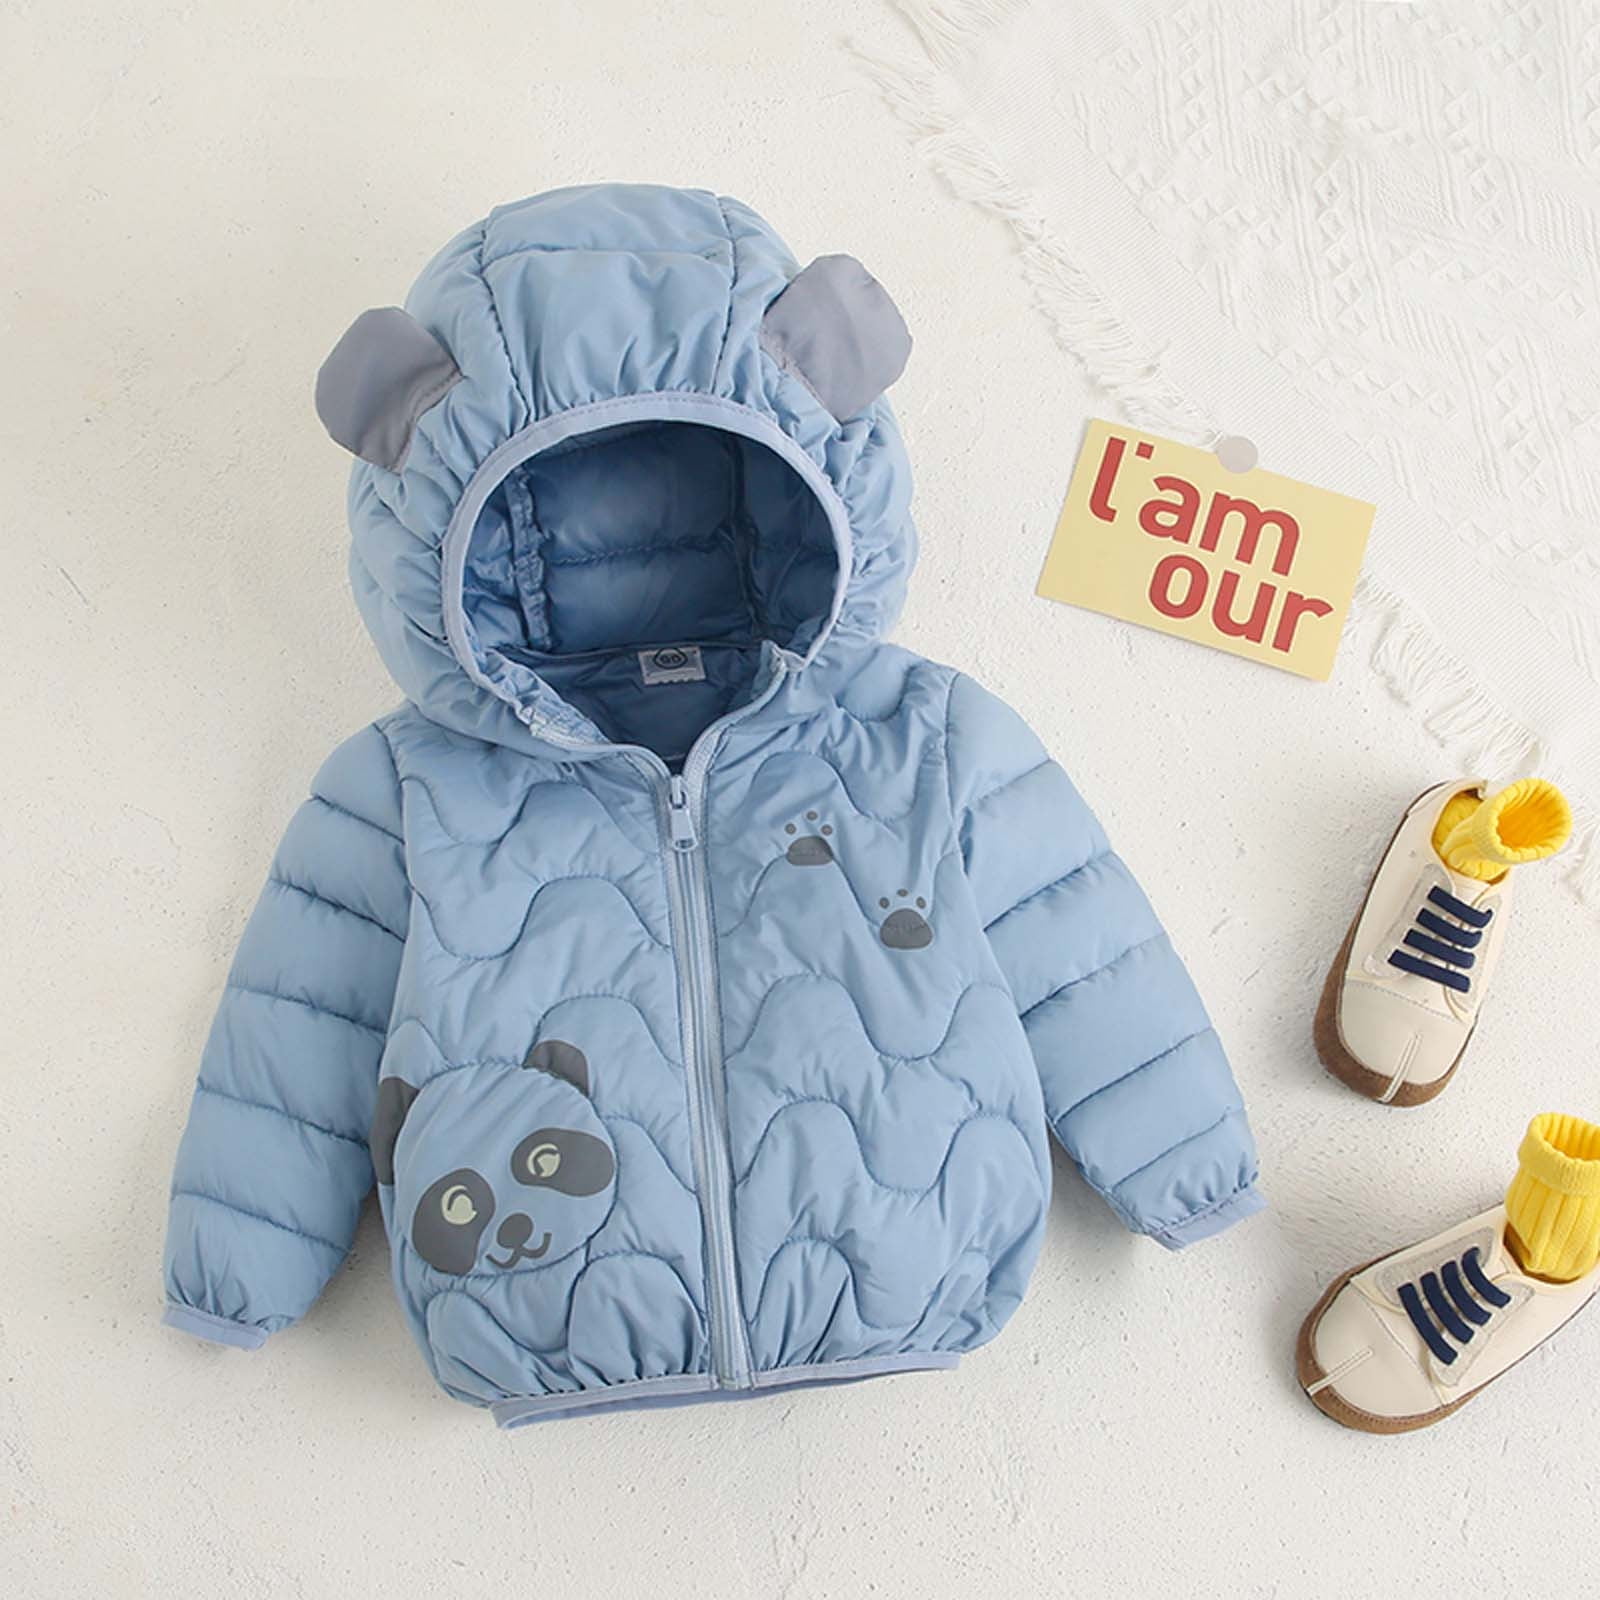 Baby Wool Parka Hooded Tops Jacket Padded Coat Kids Cloak Thick Warm Clothes for 6 Months-4 Years HOMEBABY Baby Girls Boys Winter Panda Hooded Coat